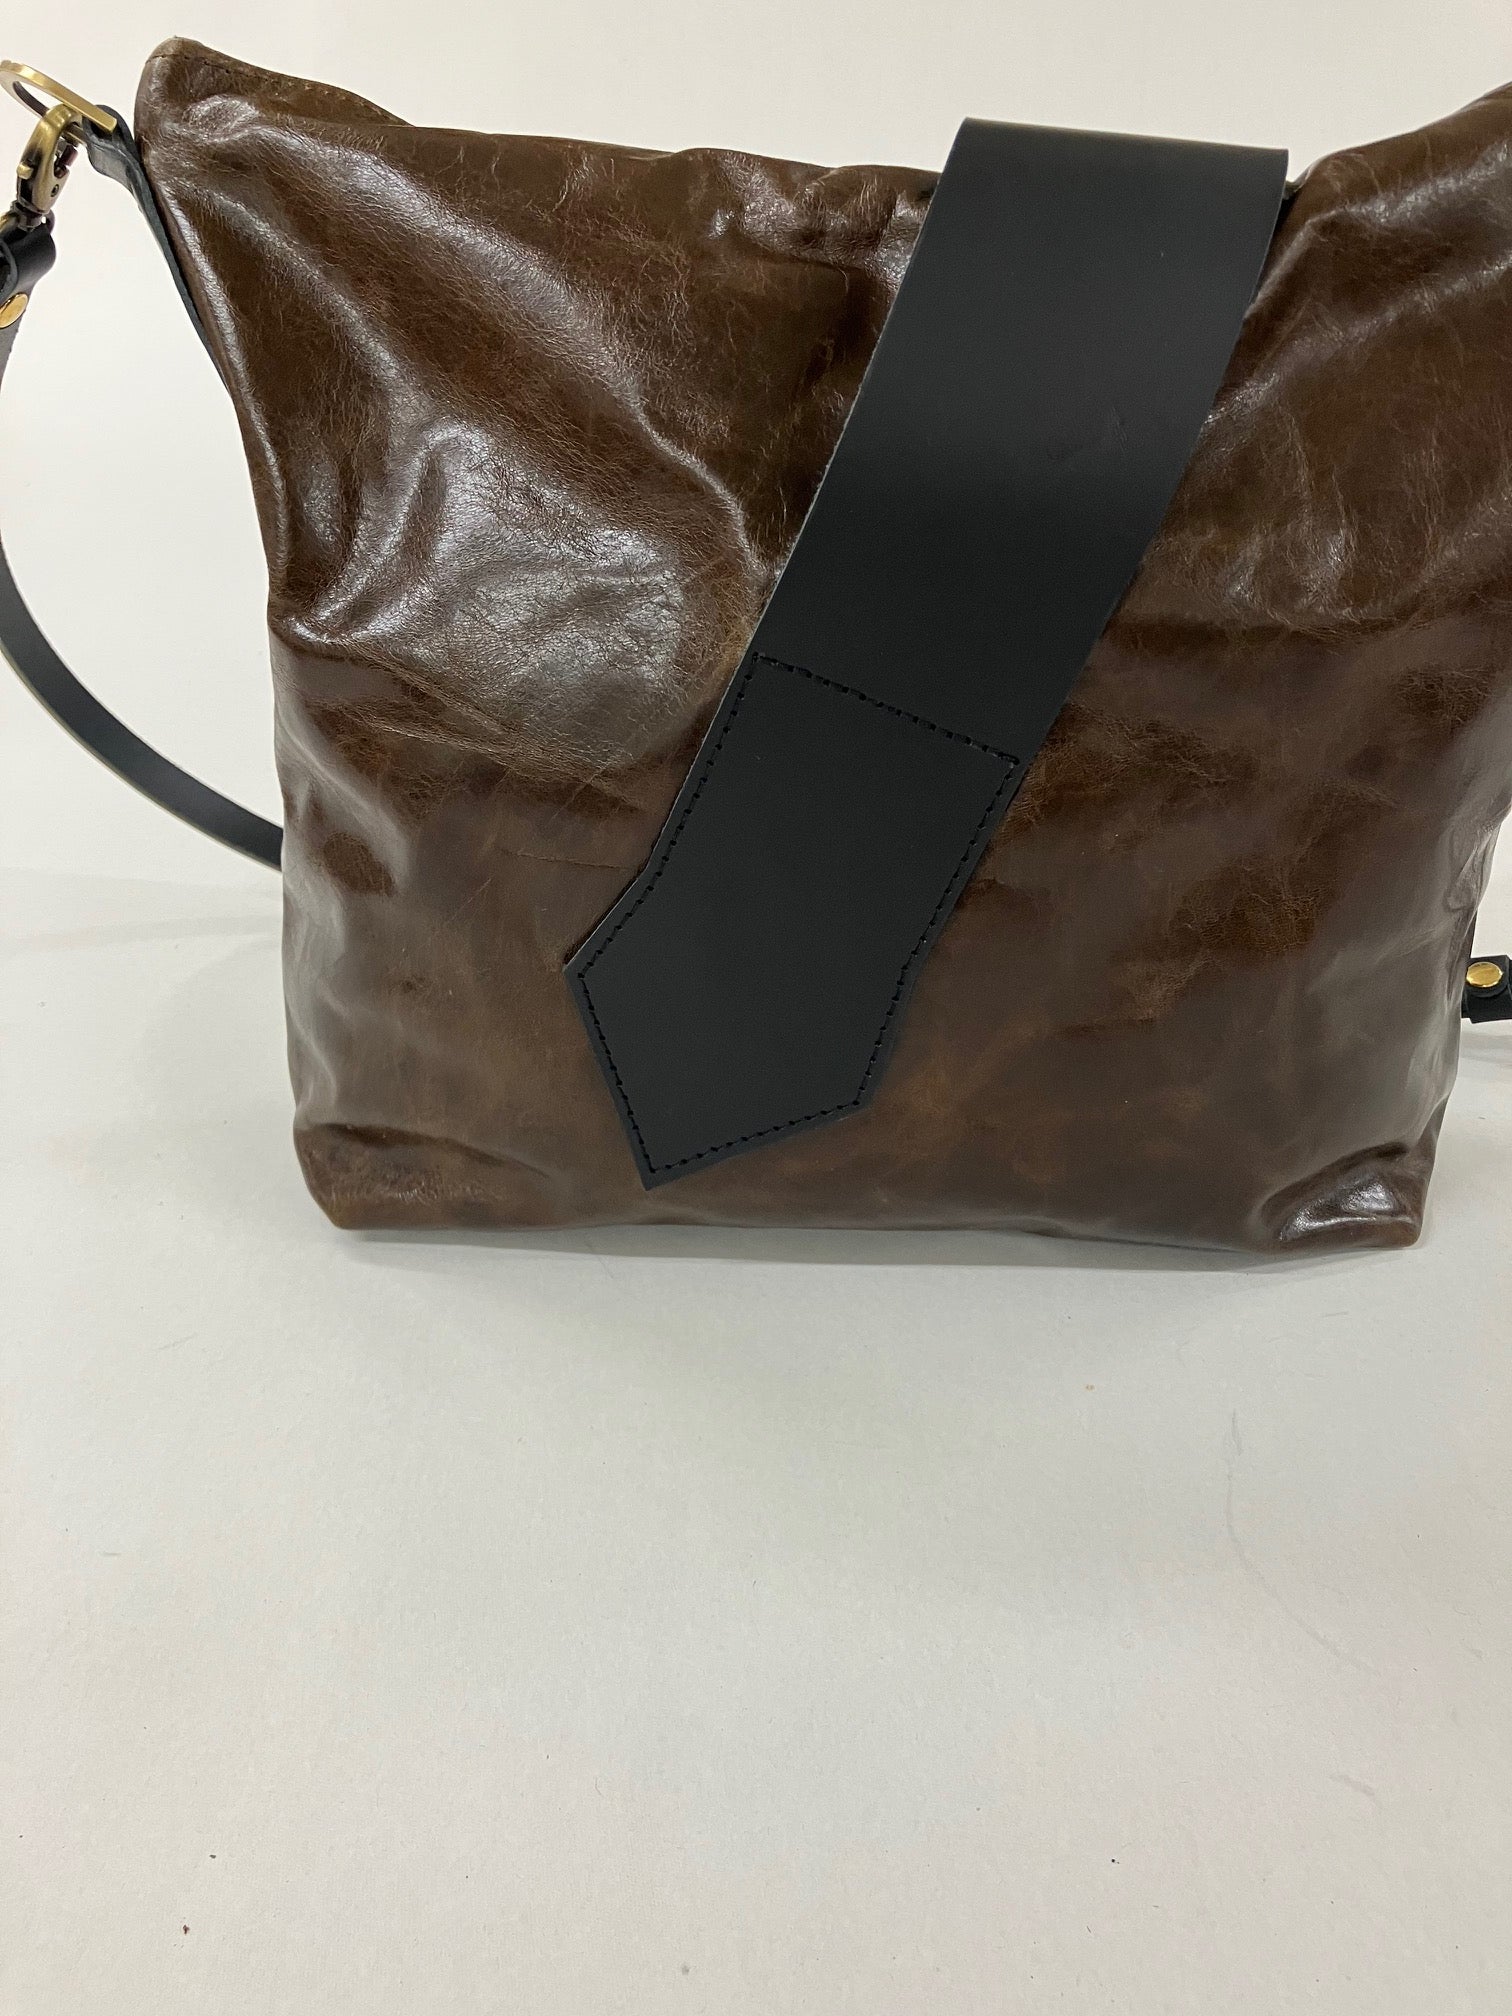 SAMPLE Leather crossbody tote bag, cognac brown leather purse handmade in Montreal